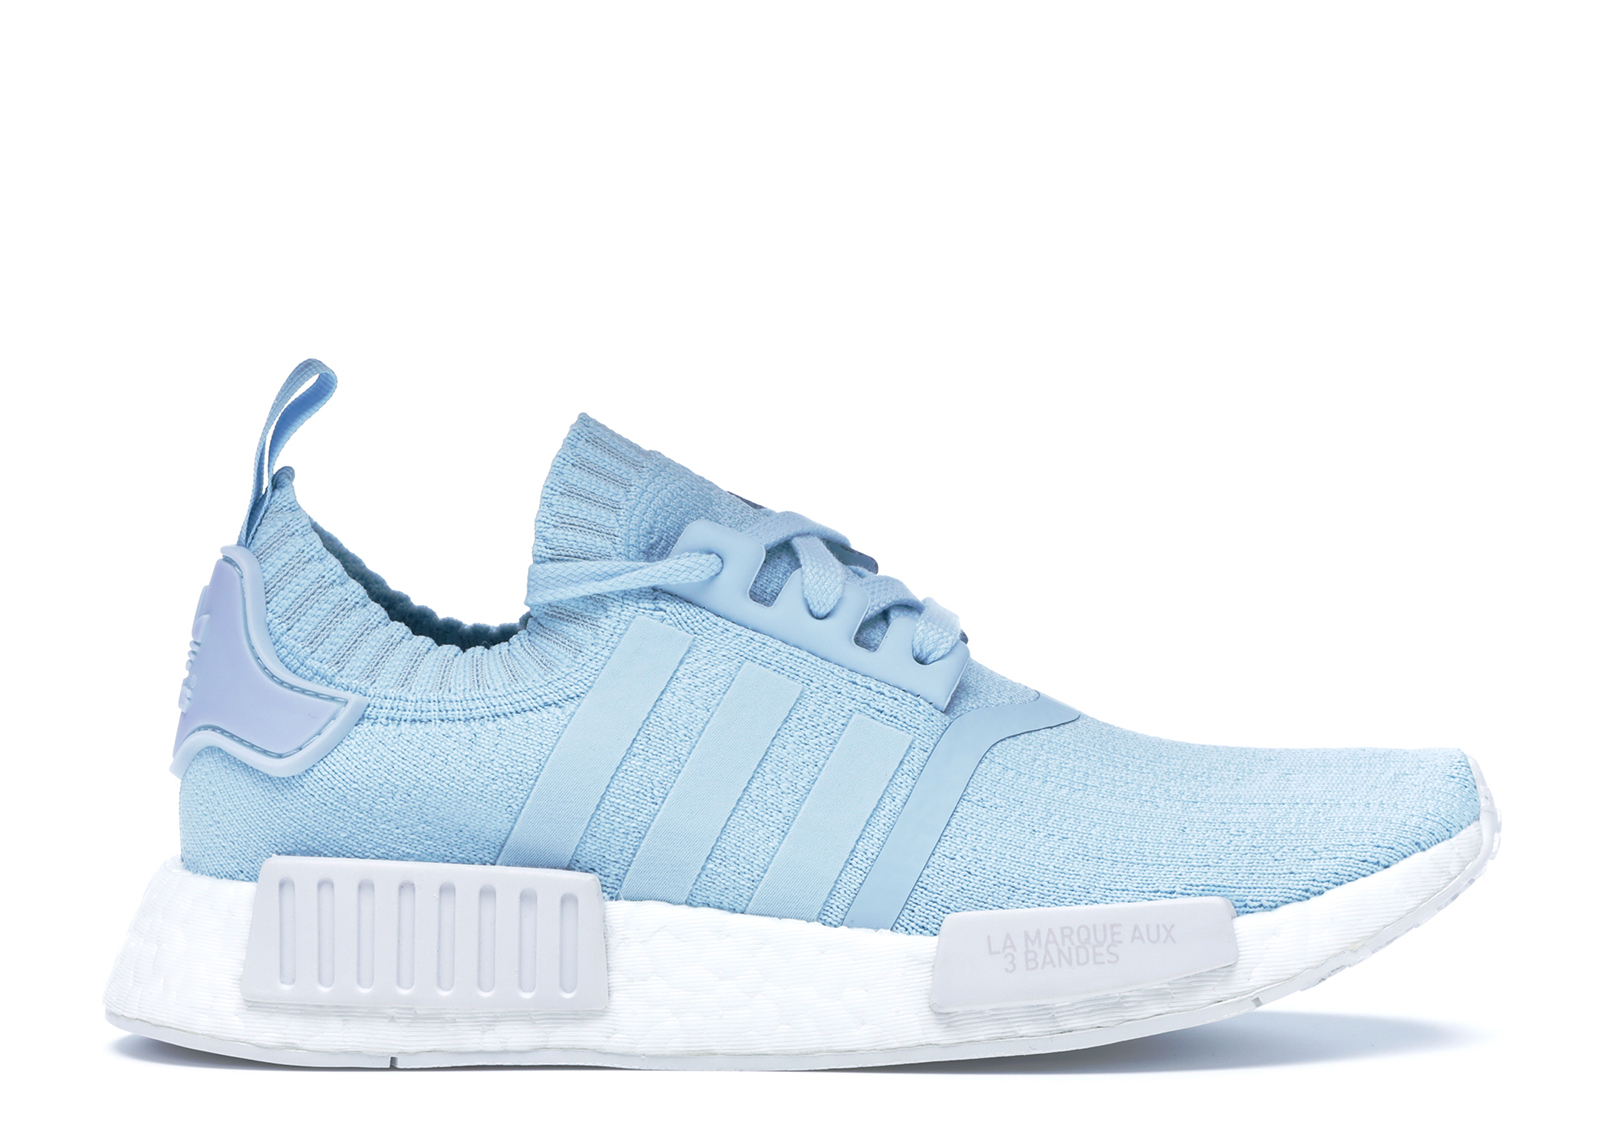 blue and white nmd r1